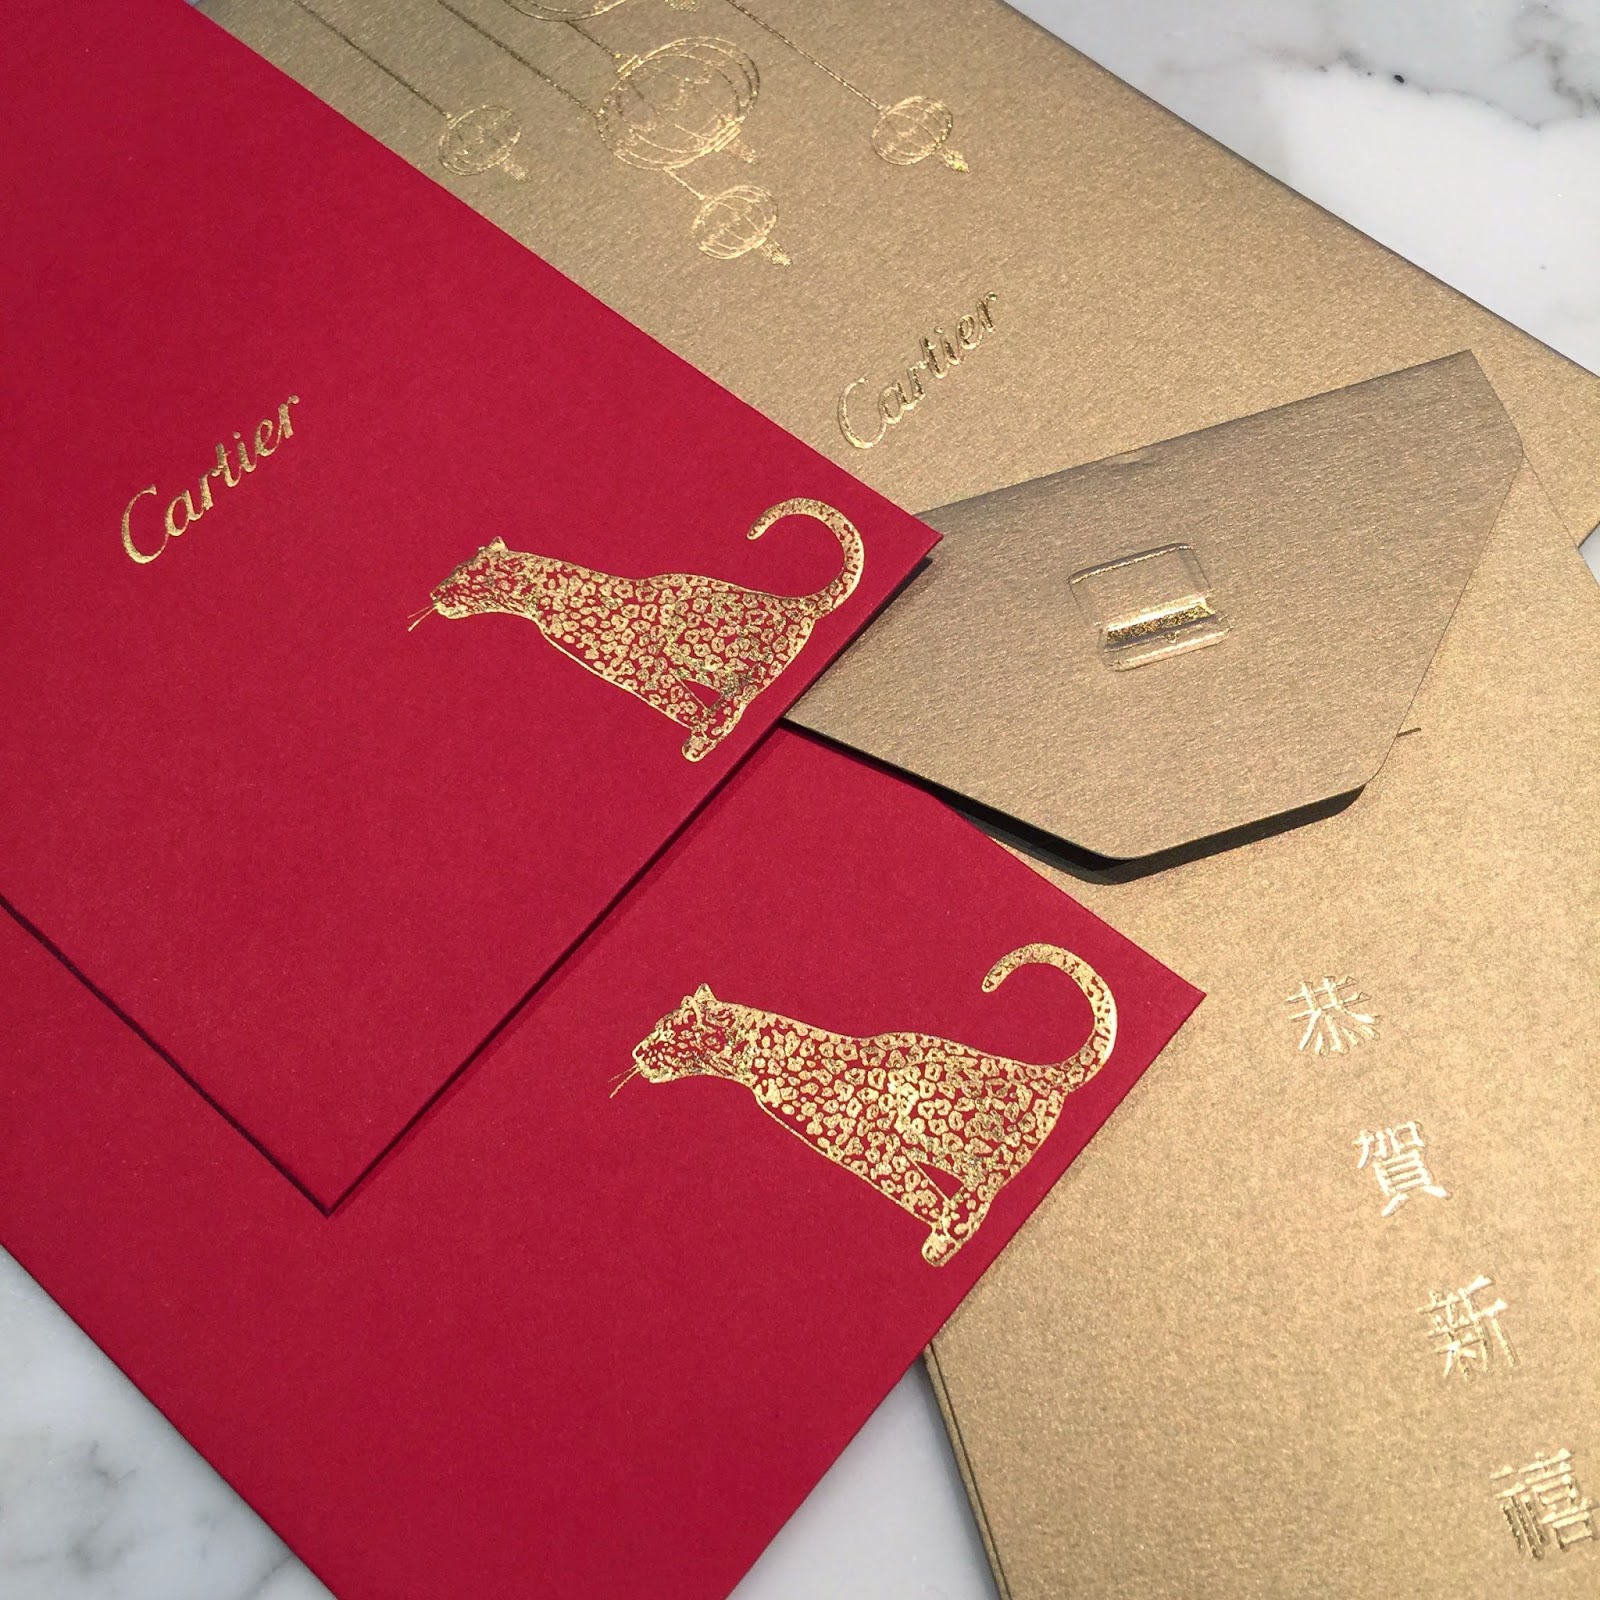 Montblanc/Cartier Red Packet Envelope 6pc Hong Bao New Year 2013/Rat/Dog  Lucky